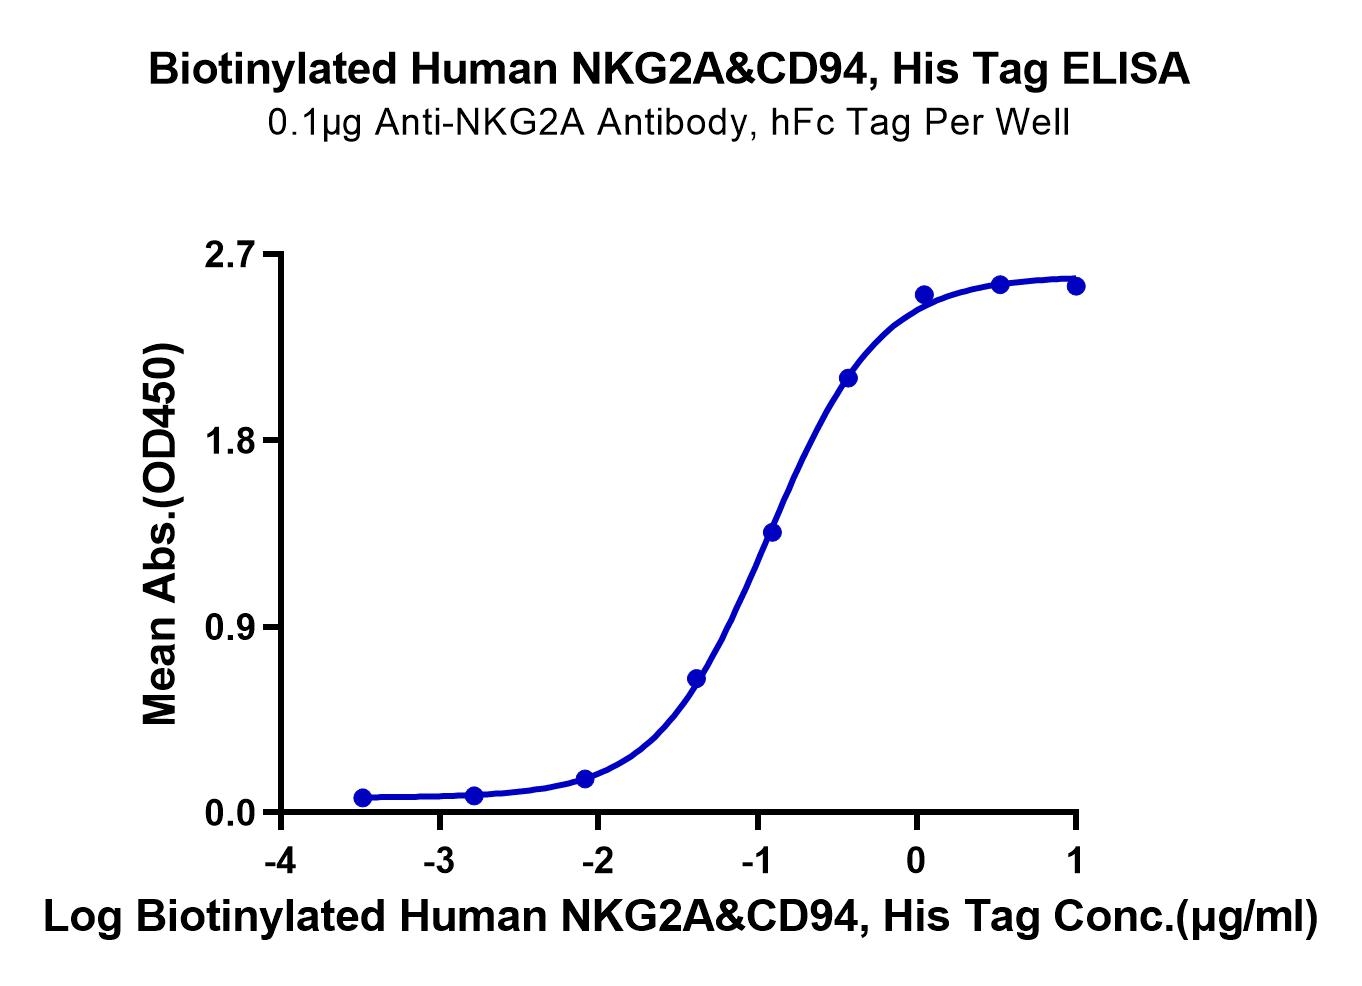 20220826155022 - Biotinylated Human NKG2A&CD94 Protein, Accession: P26715